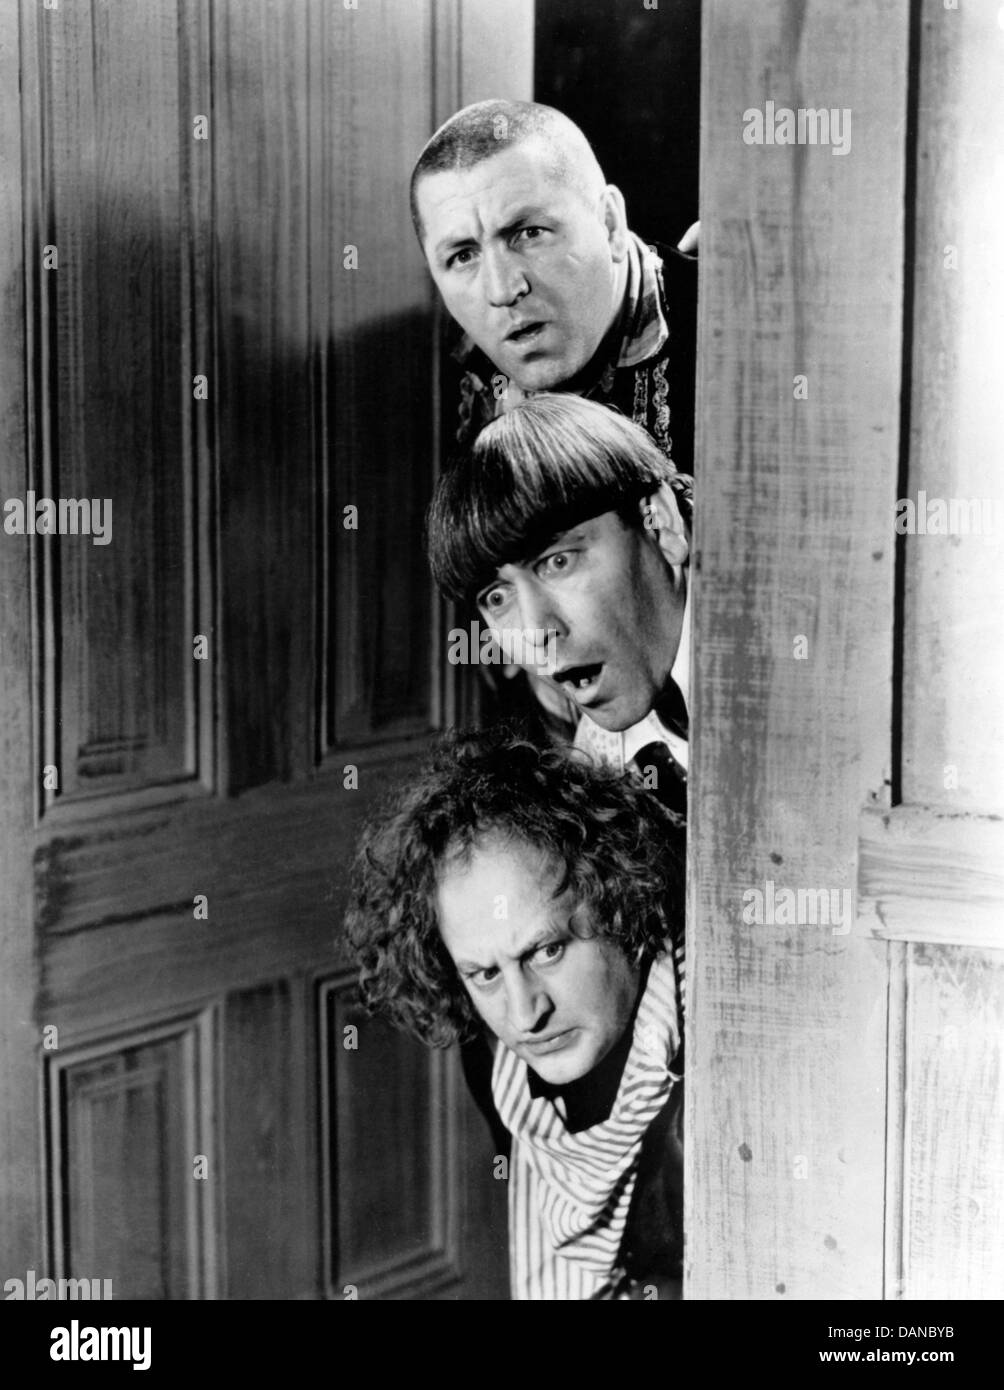 THREE STOOGES (ACTORS) PORTRAITS CURLY HOWARD, MOE HOWARD, LARRY FINE, TSTO 002 MOVIESTORE COLLECTION LTD Stock Photo